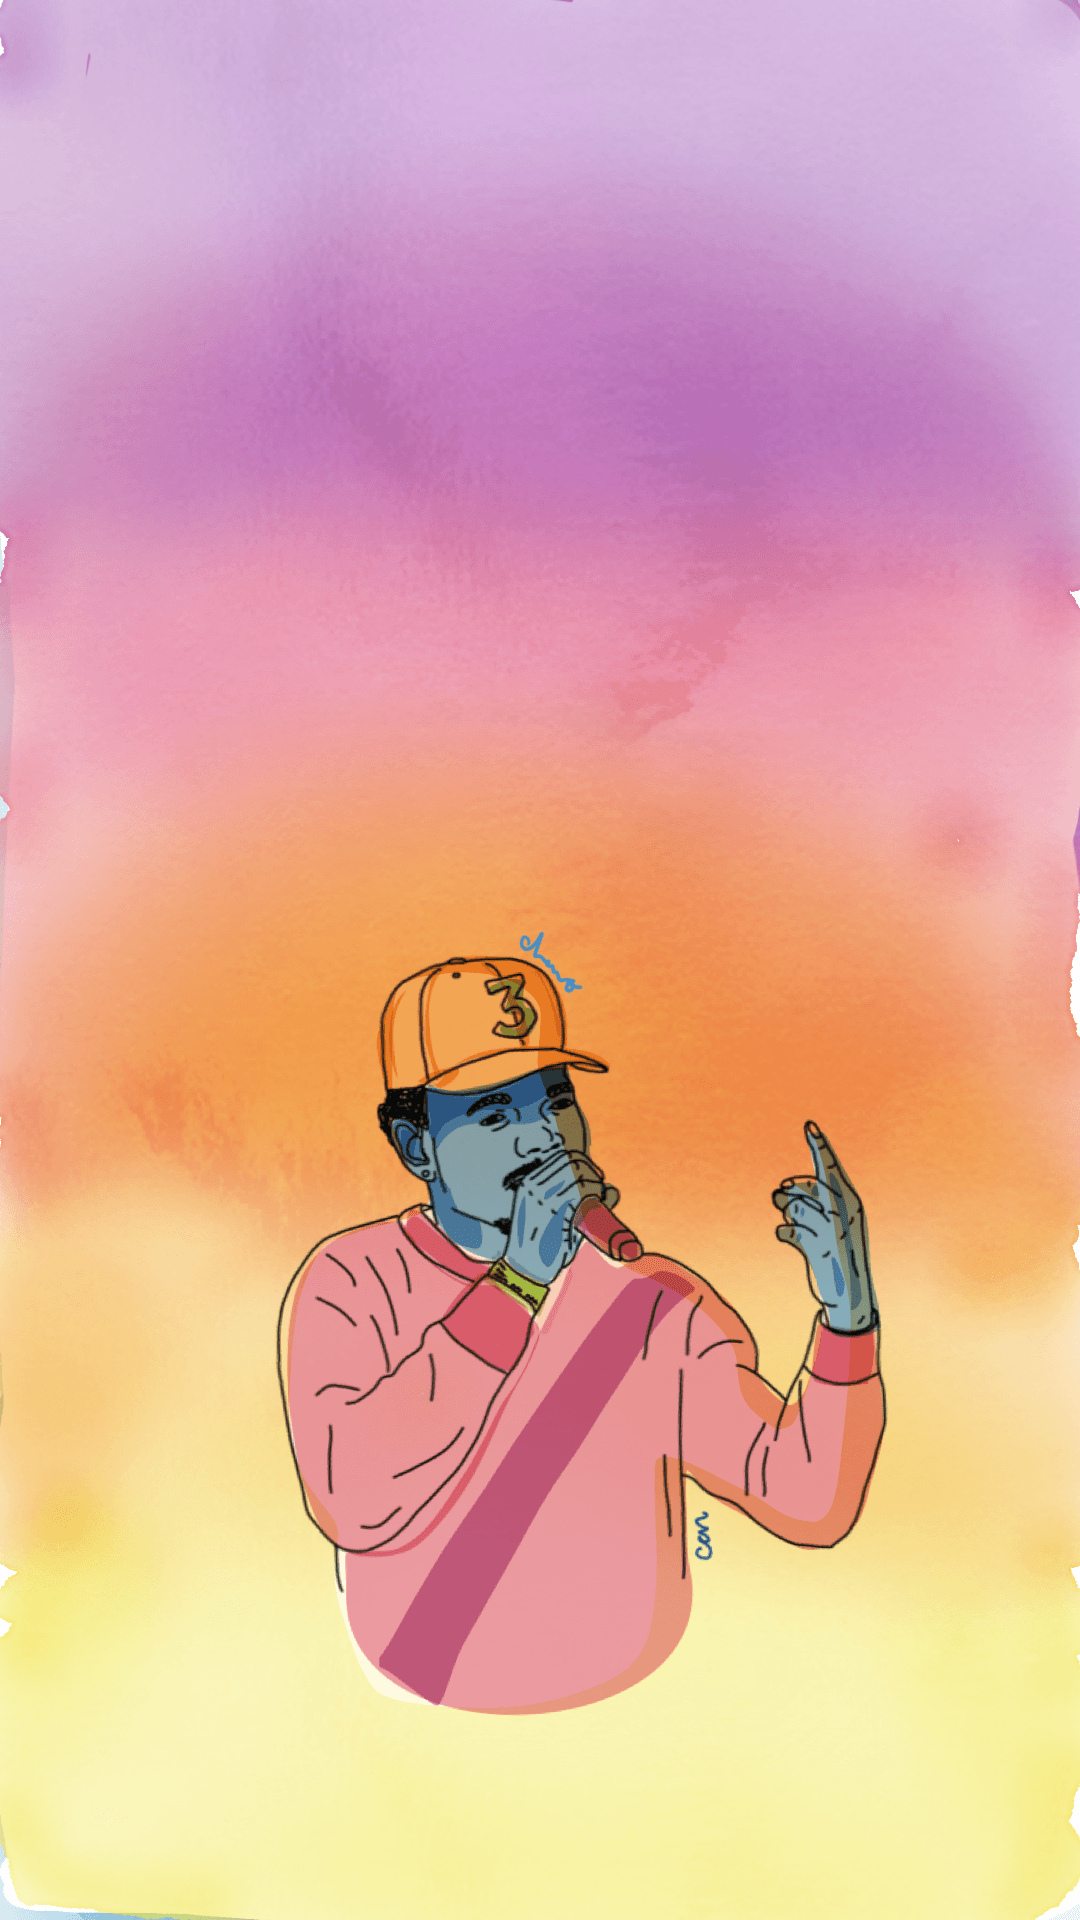 Chance The Rapper  Chance The Rapper iPhone X Rappers HD phone wallpaper   Pxfuel